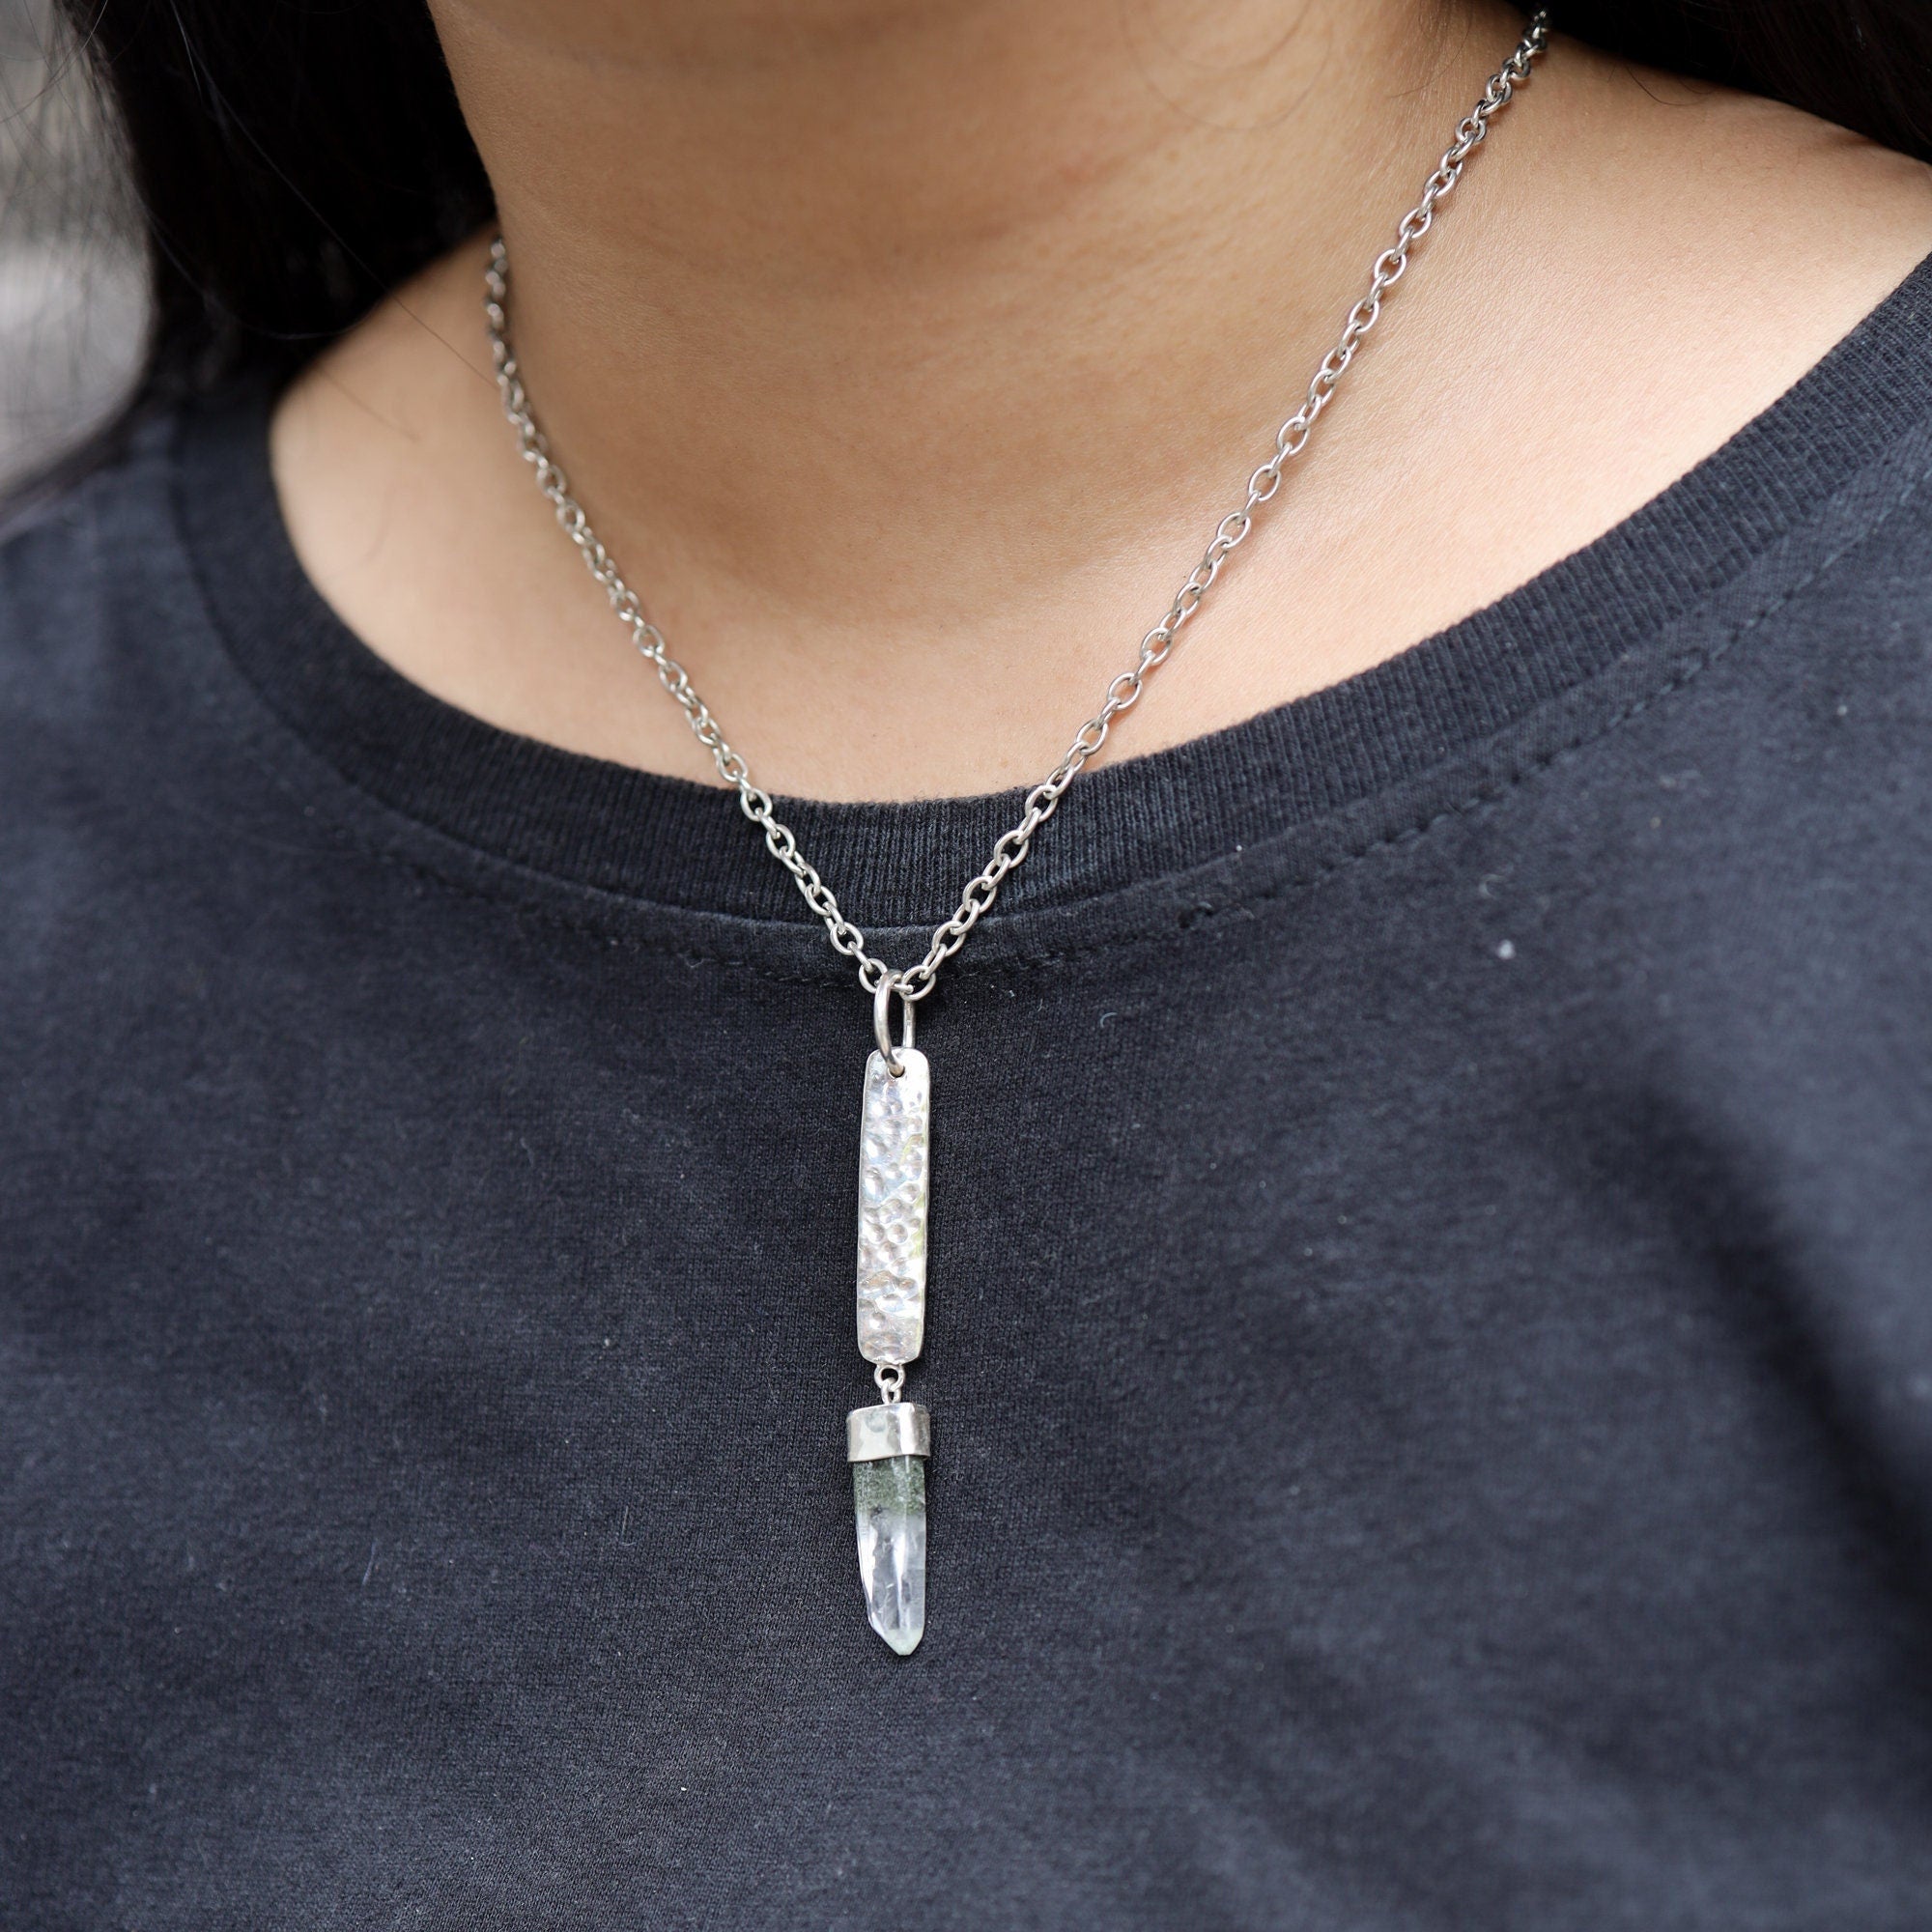 Himalayan Harmony Chloride Inclusion Laser Quartz Point Pendant - Sterling Silver - Hammer Texture & Shiny Finish